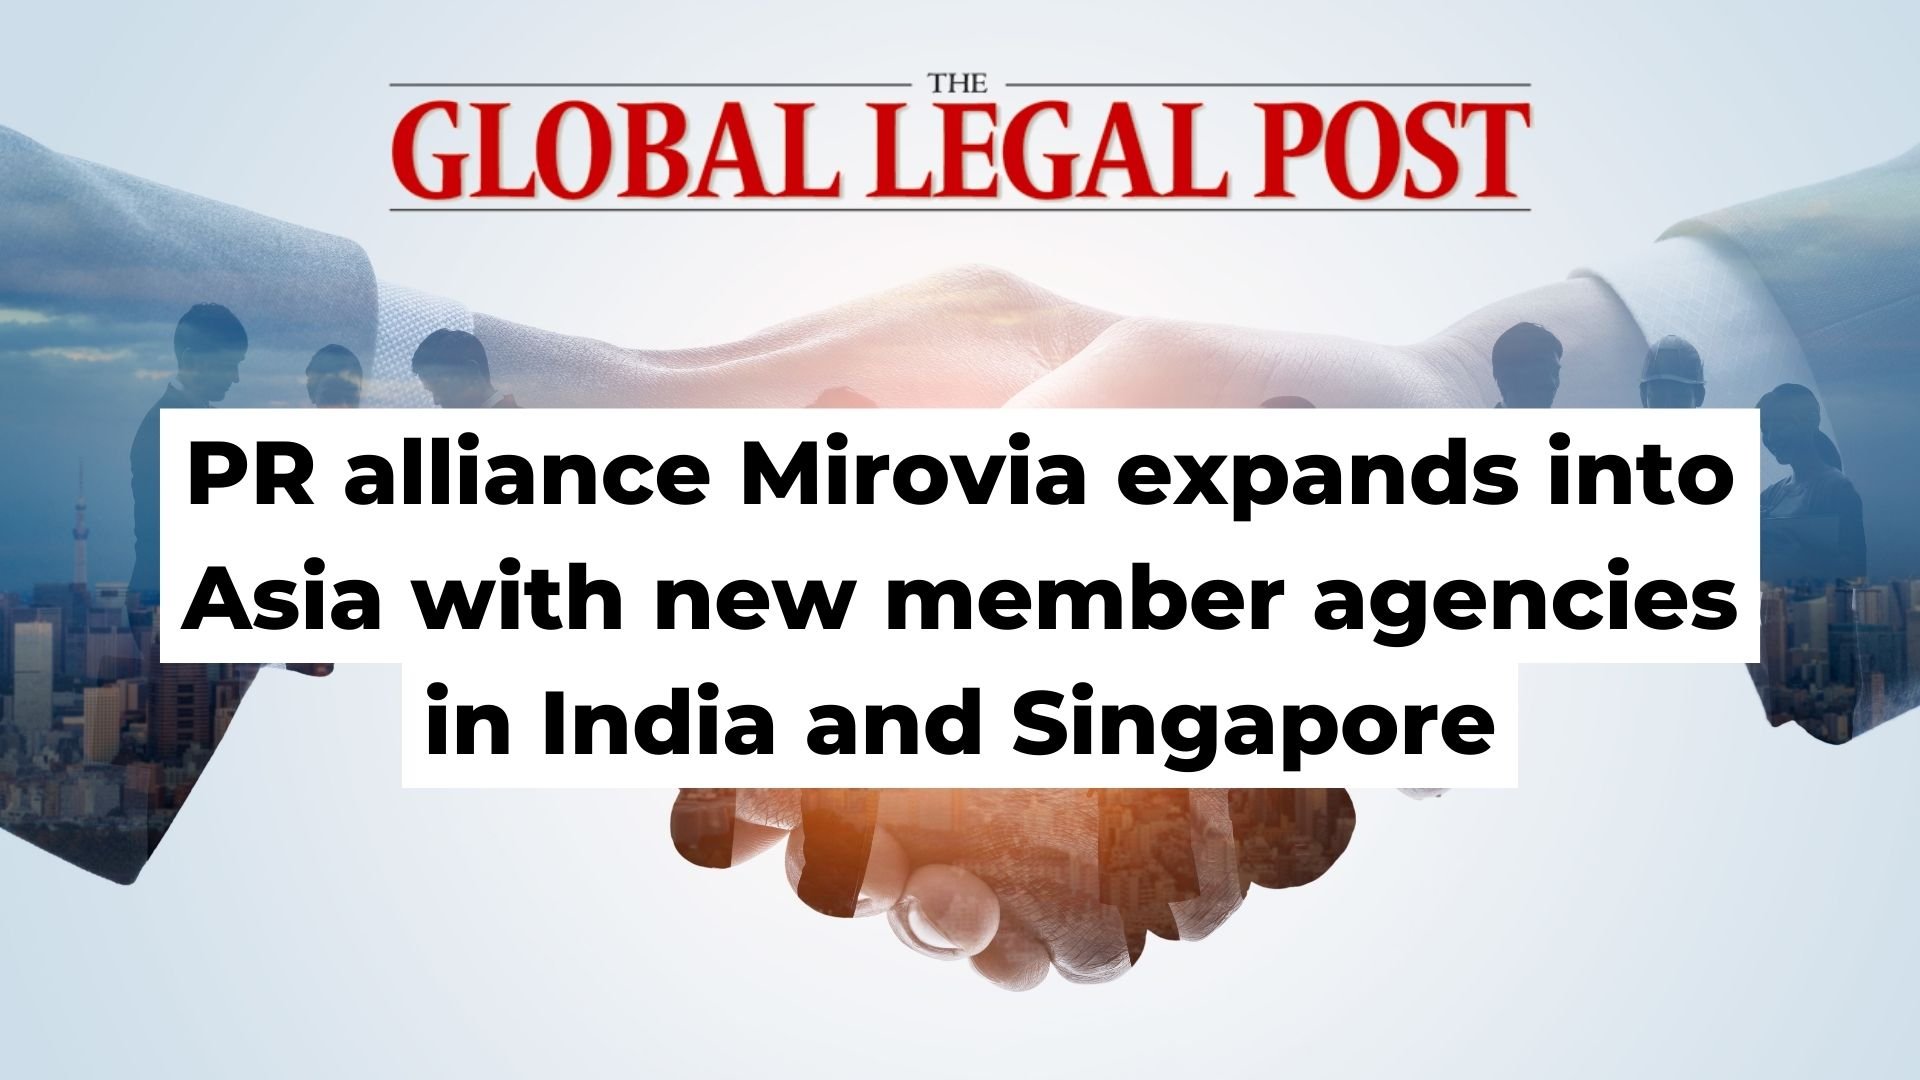 PR alliance Mirovia expands into Asia with new member agencies in India and Singapore